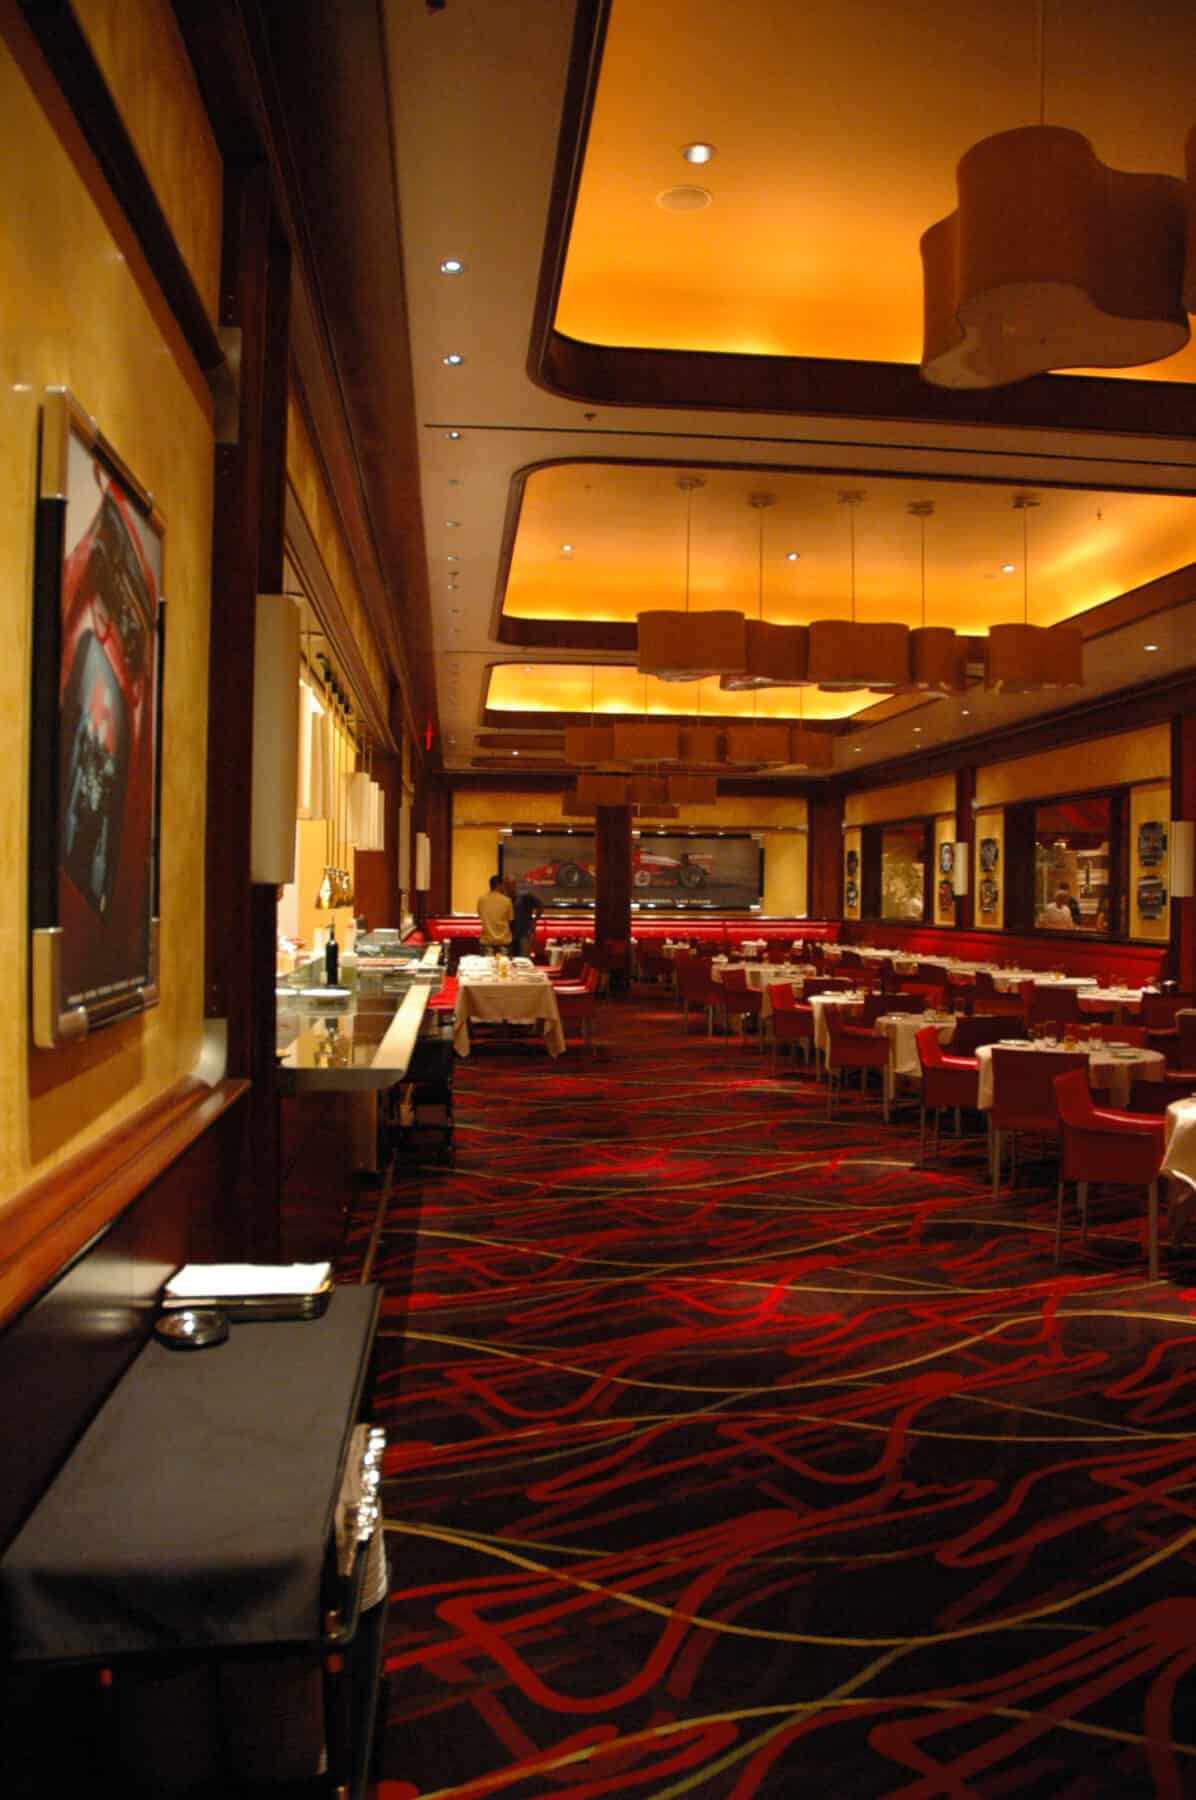 Custom Flooring and Lighting for Restaurant at Wynn Hotel Remodel by Commercial Builder & General Contractor Structural Enterprises